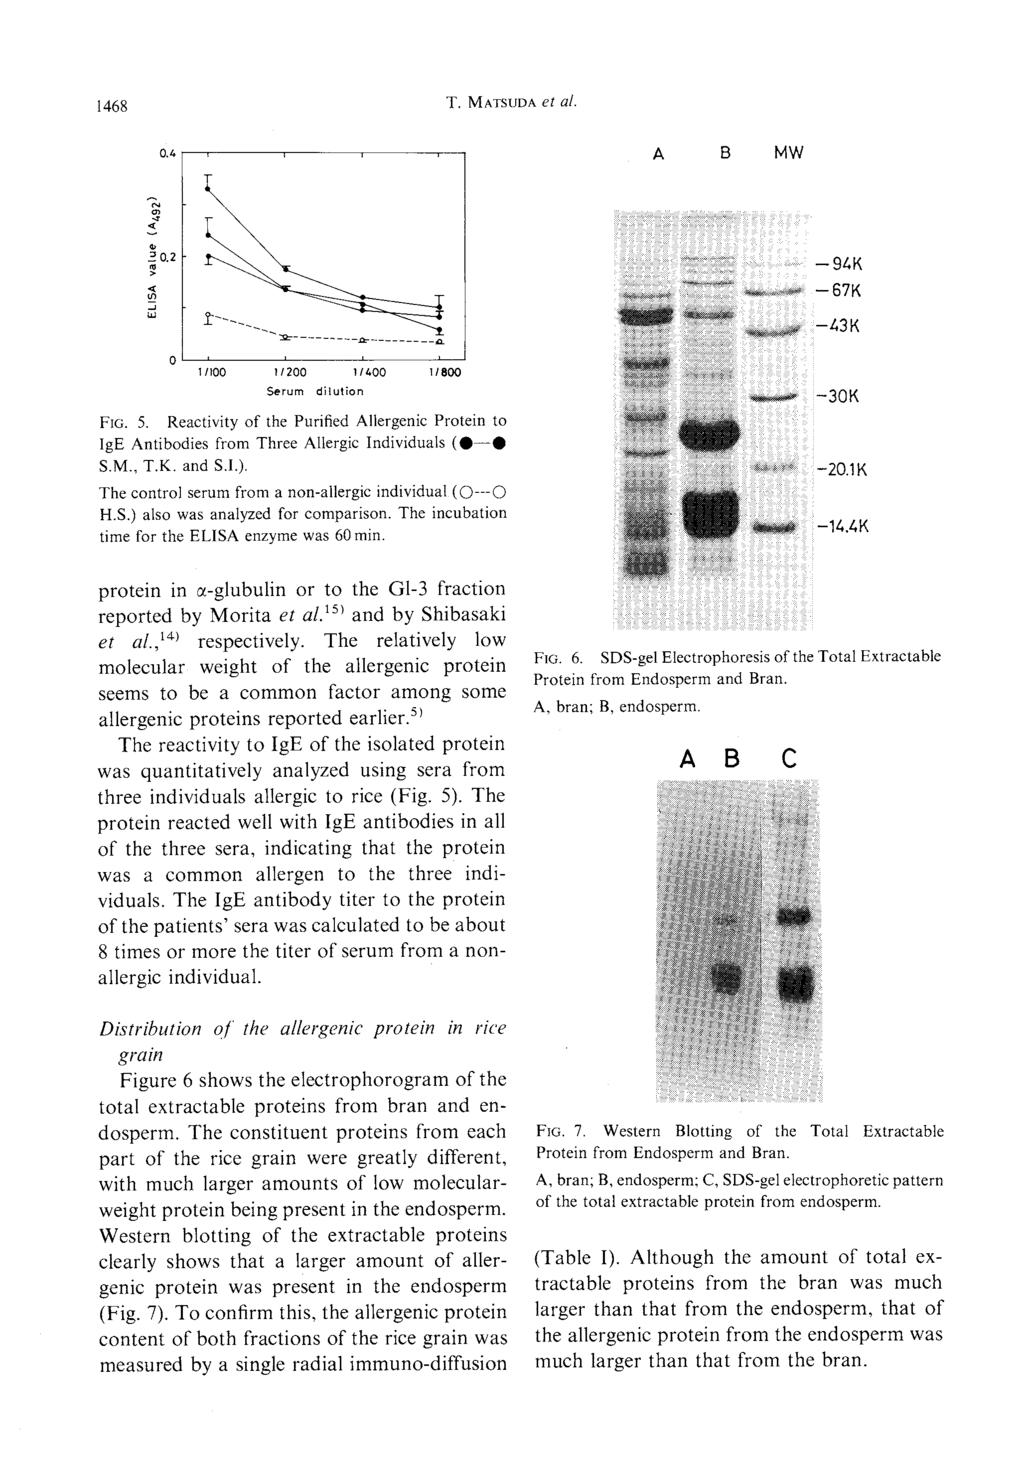 1468 T- Matsuda et al. Fig. 5. Reactivity of the Purified Allergenic Protein to IgE Antibodies from Three Allergic Individuals (#-# S.M., T.K. and S.I.)- The control serum from a non-allergic individual (O-O H.